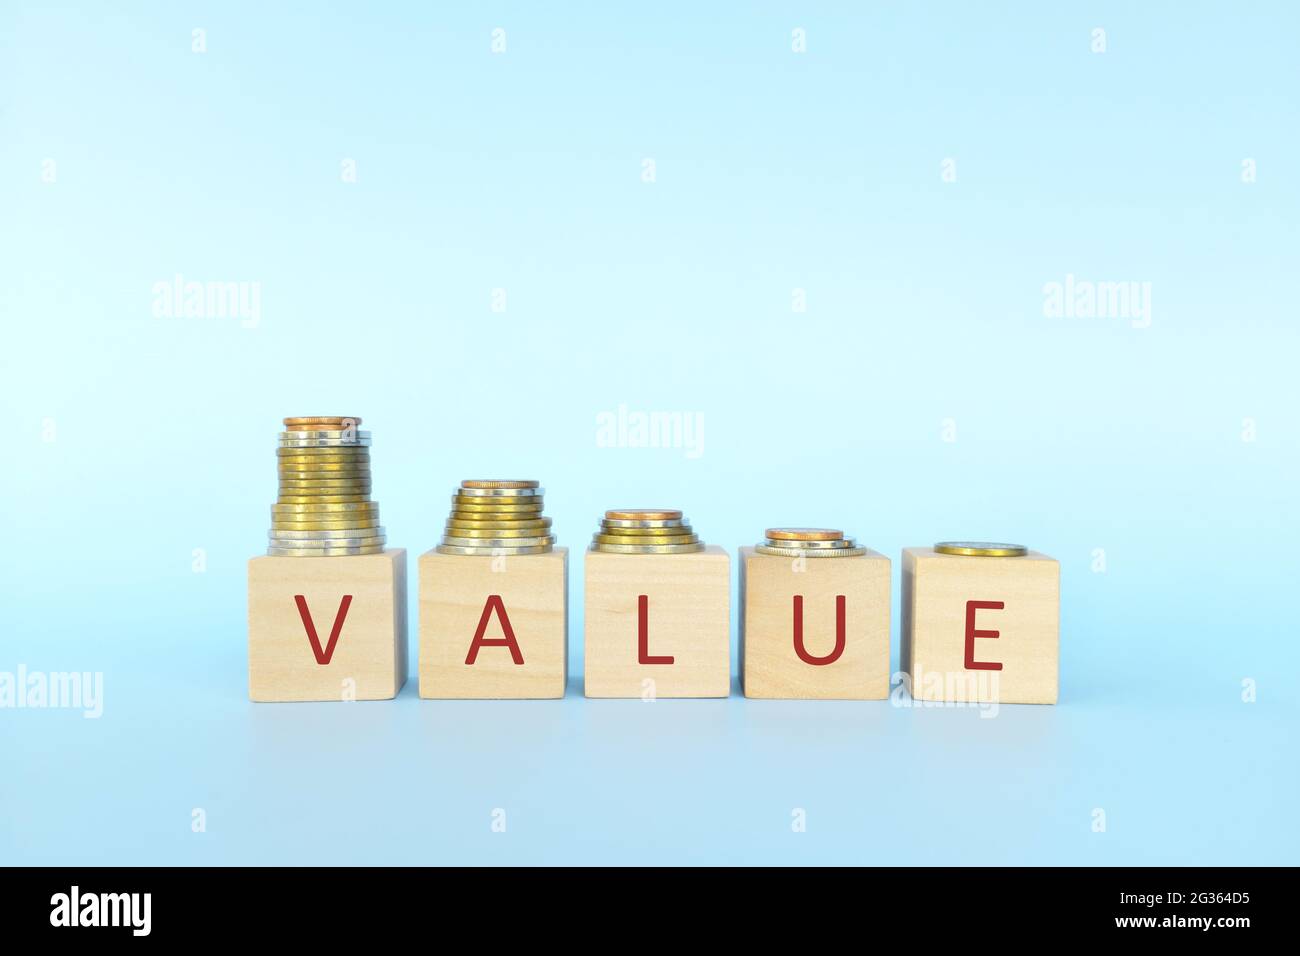 Price devaluation or value depreciation concept. Decreasing stack of coins in wooden blocks with word value. Stock Photo